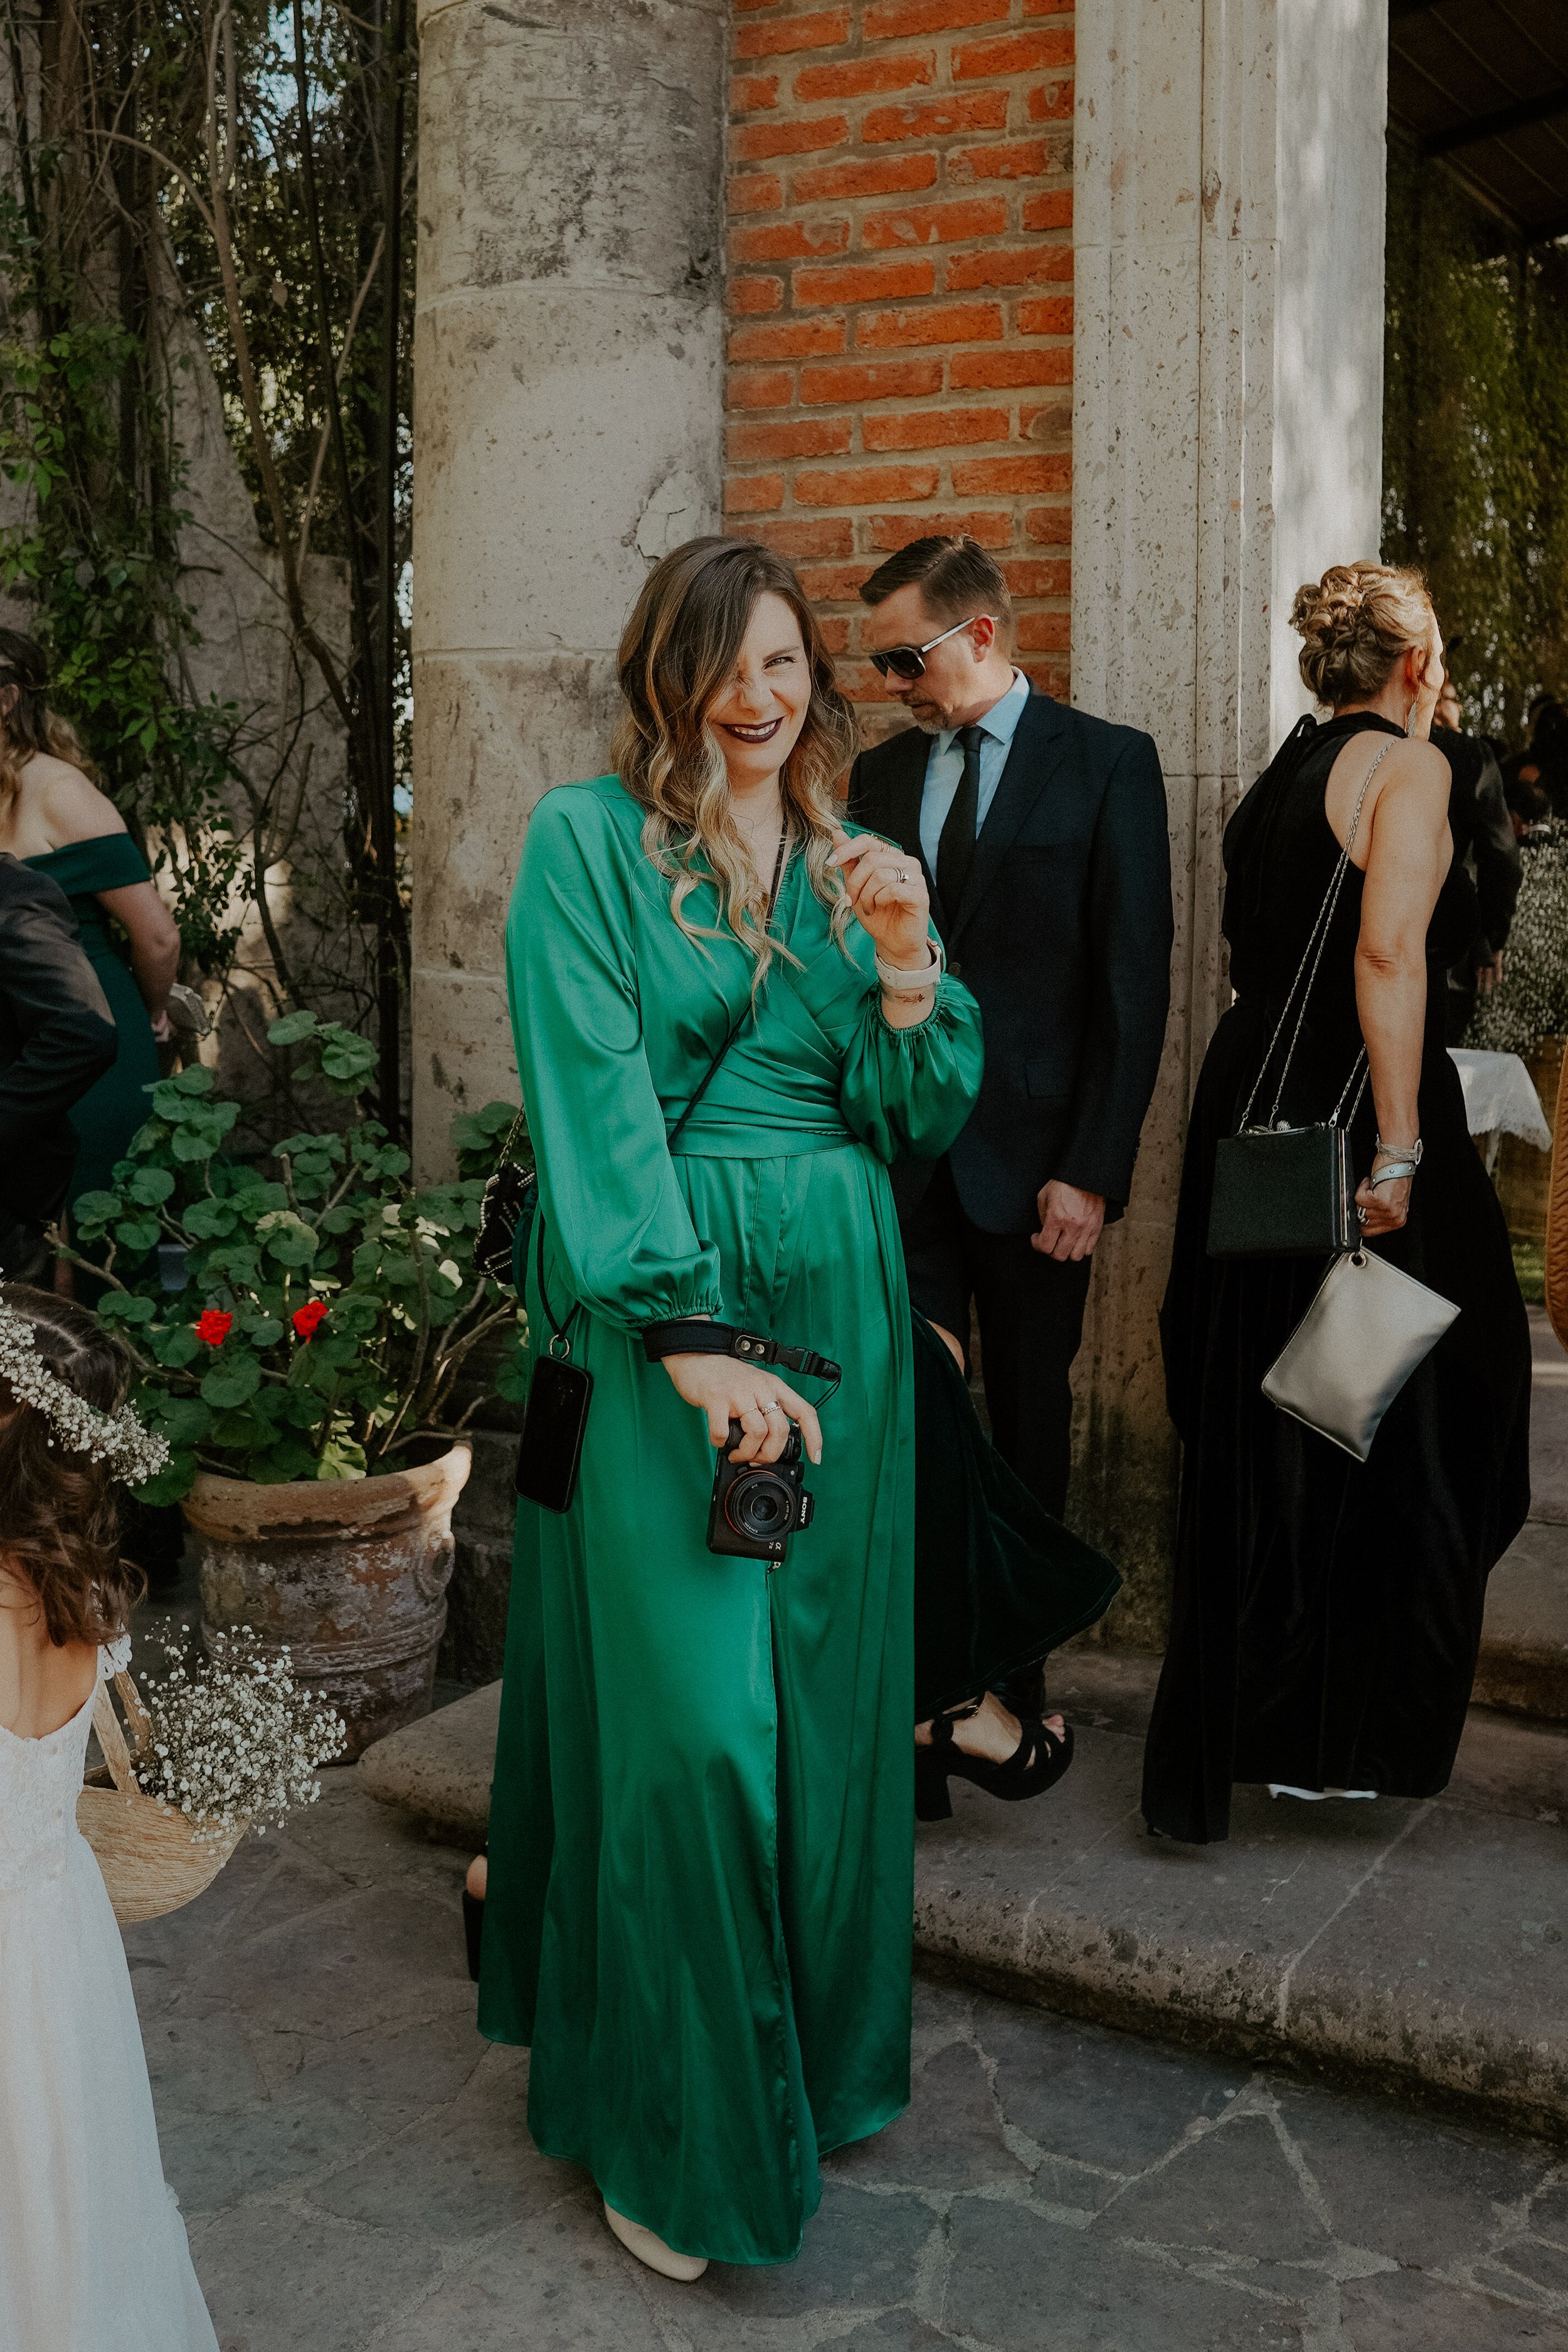 unique wedding guest outfit in a emerald green tone.